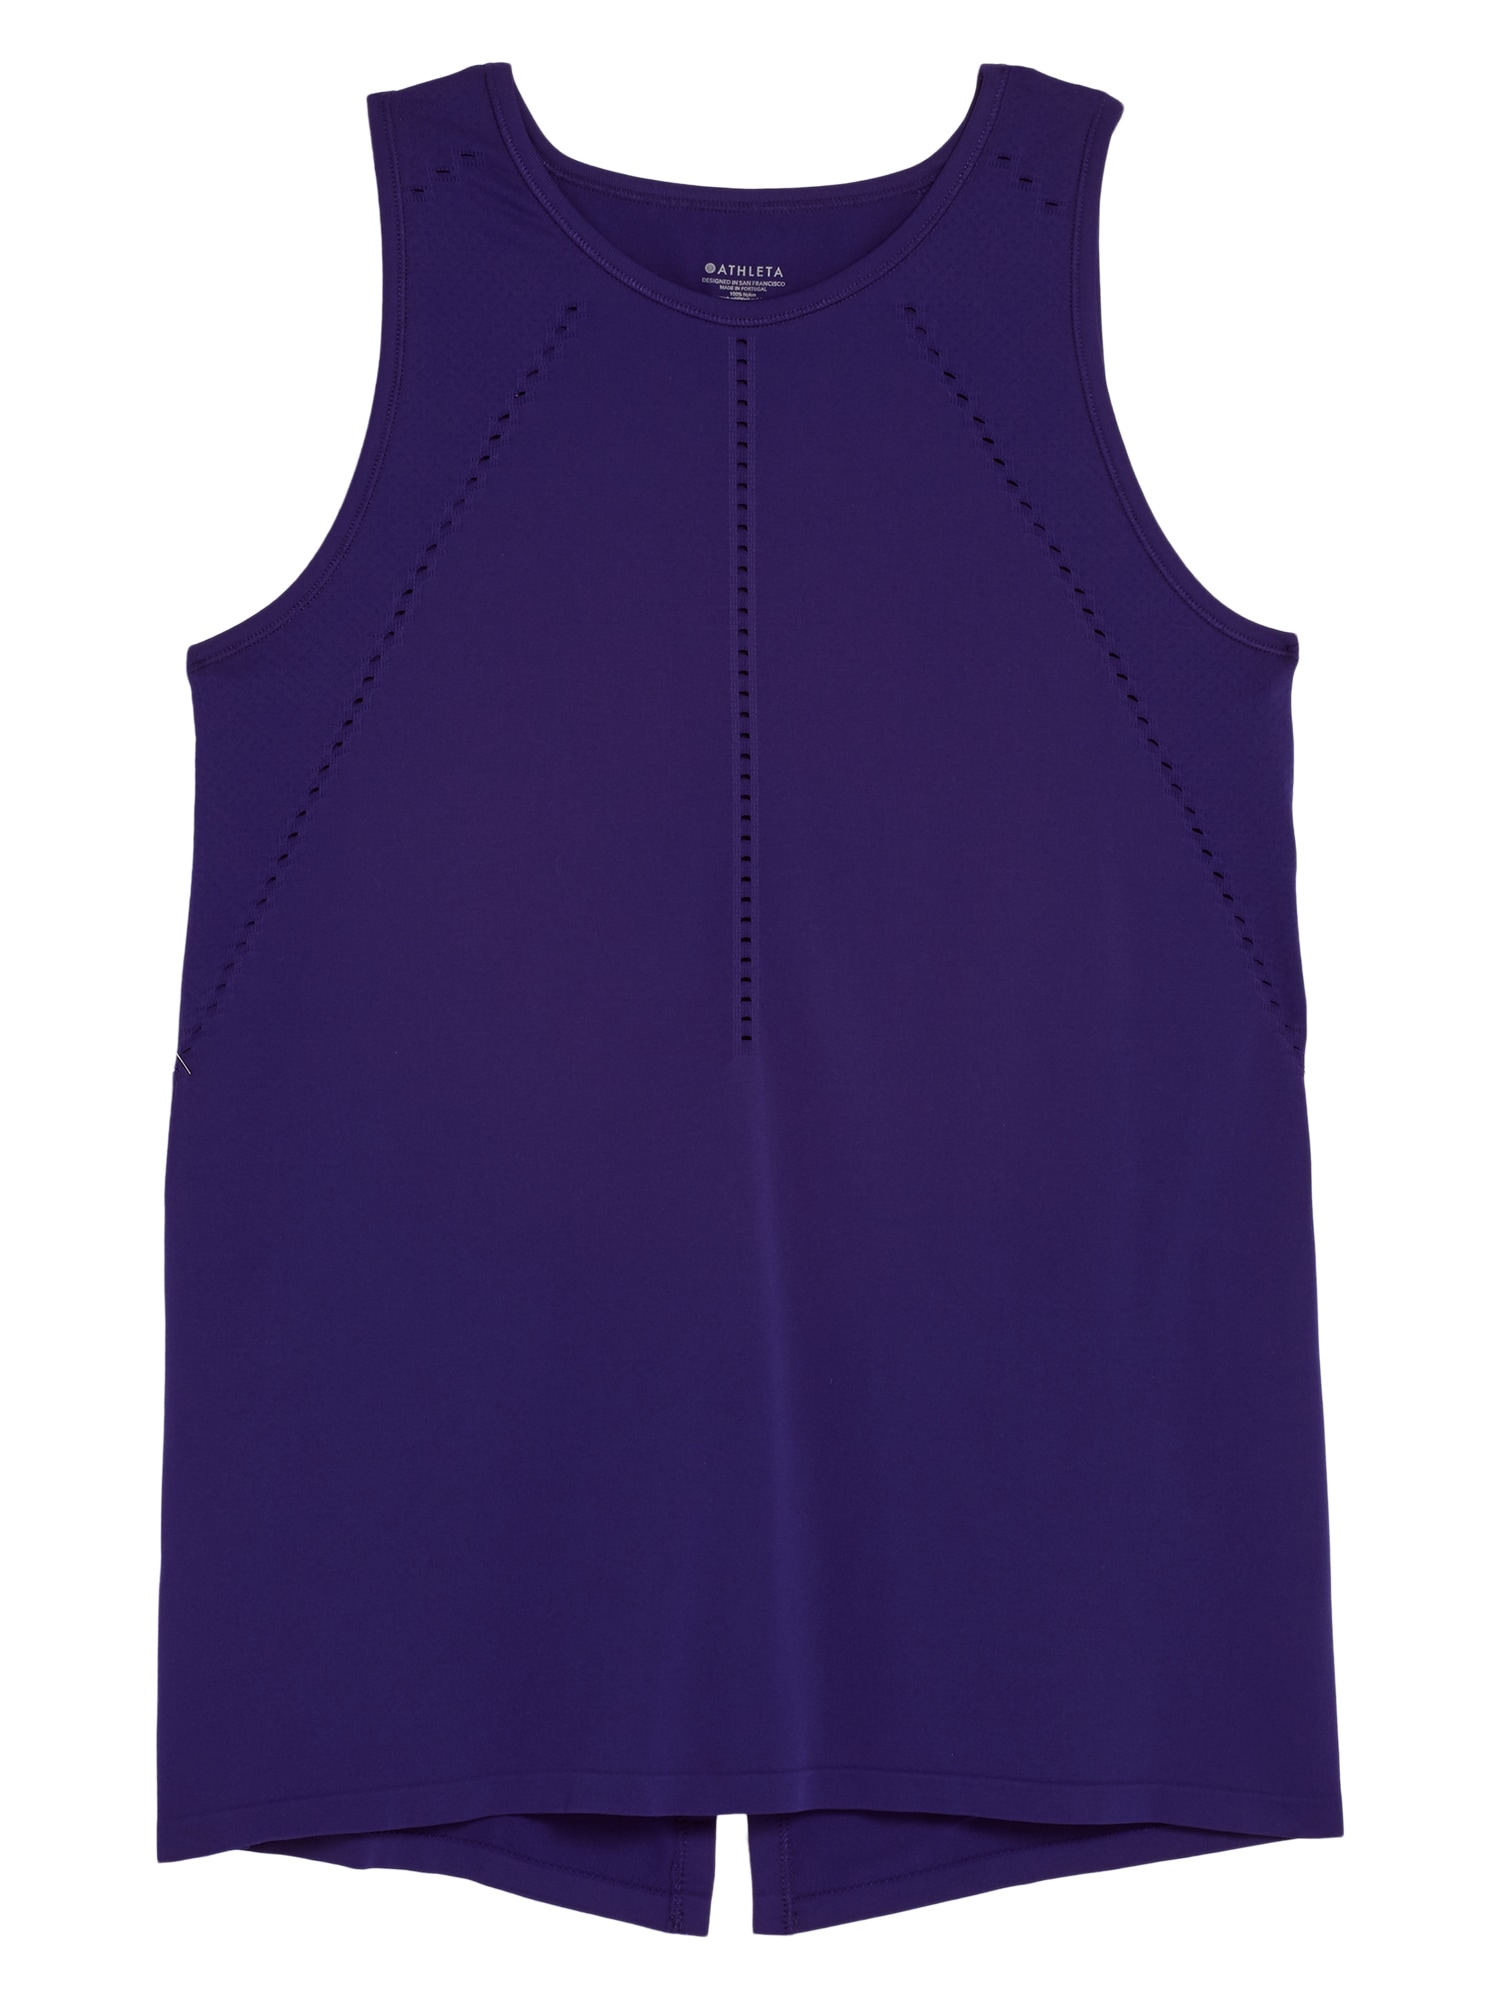 Athleta NWT Women's Foothill Tank Size XSmall Color Spiced